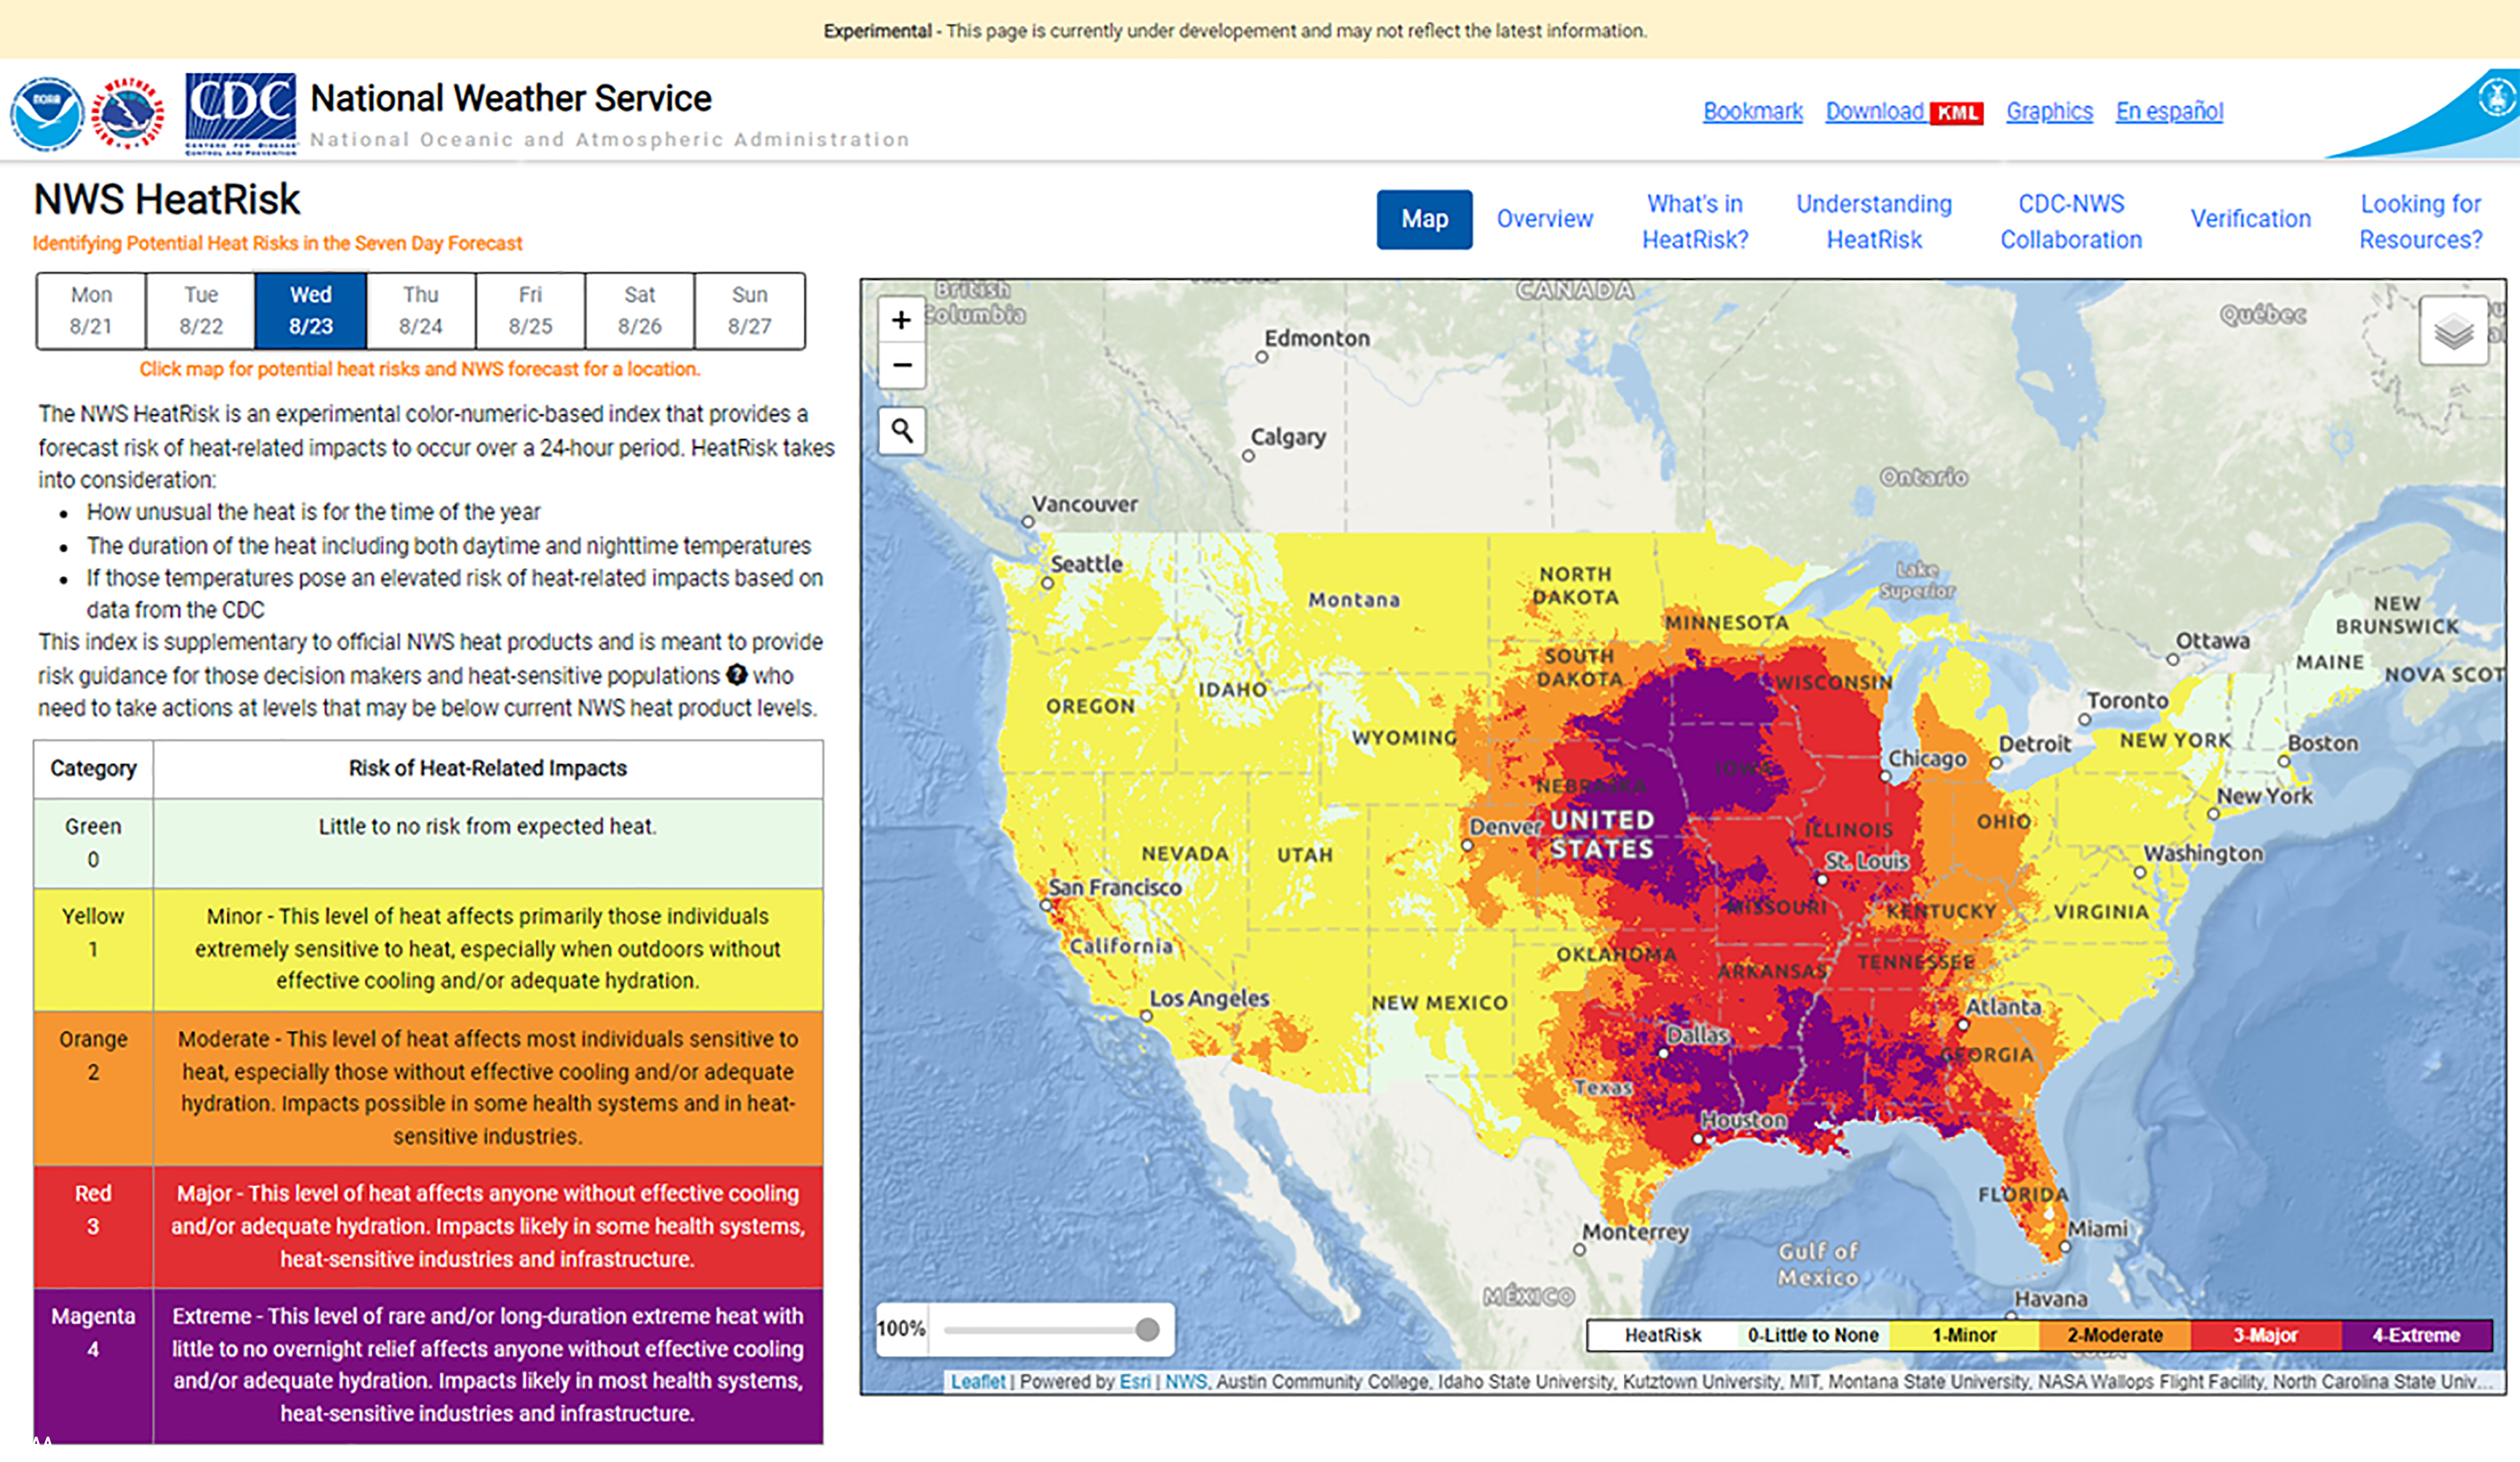 The National Weather Service's experimental HeatRisk tool website for the contiguous United States combines NWS forecasts with CDC heat data to identify potentially dangerous heat.